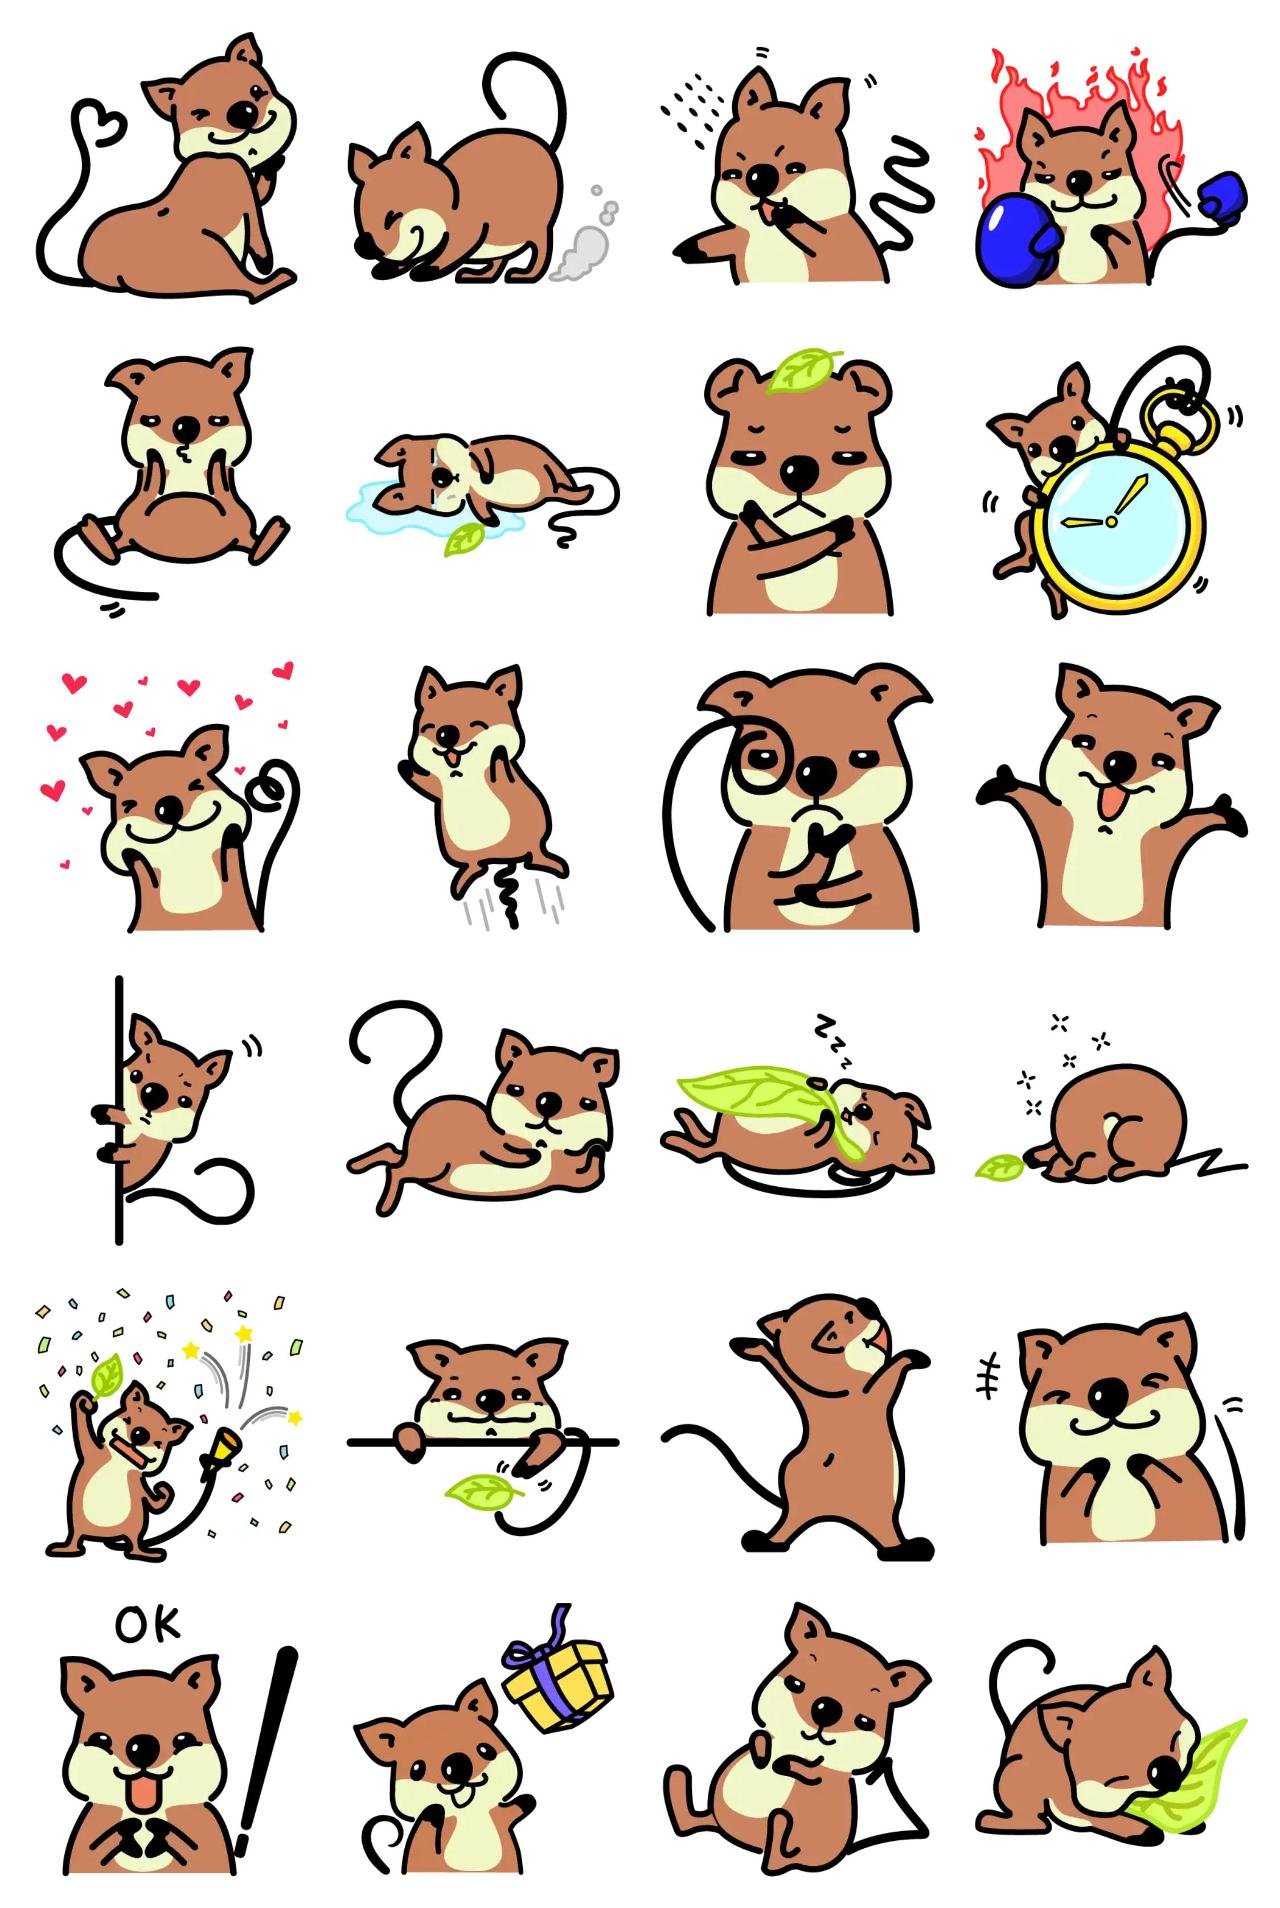 The happiest Quokka Animation/Cartoon,Animals sticker pack for Whatsapp, Telegram, Signal, and others chatting and message apps